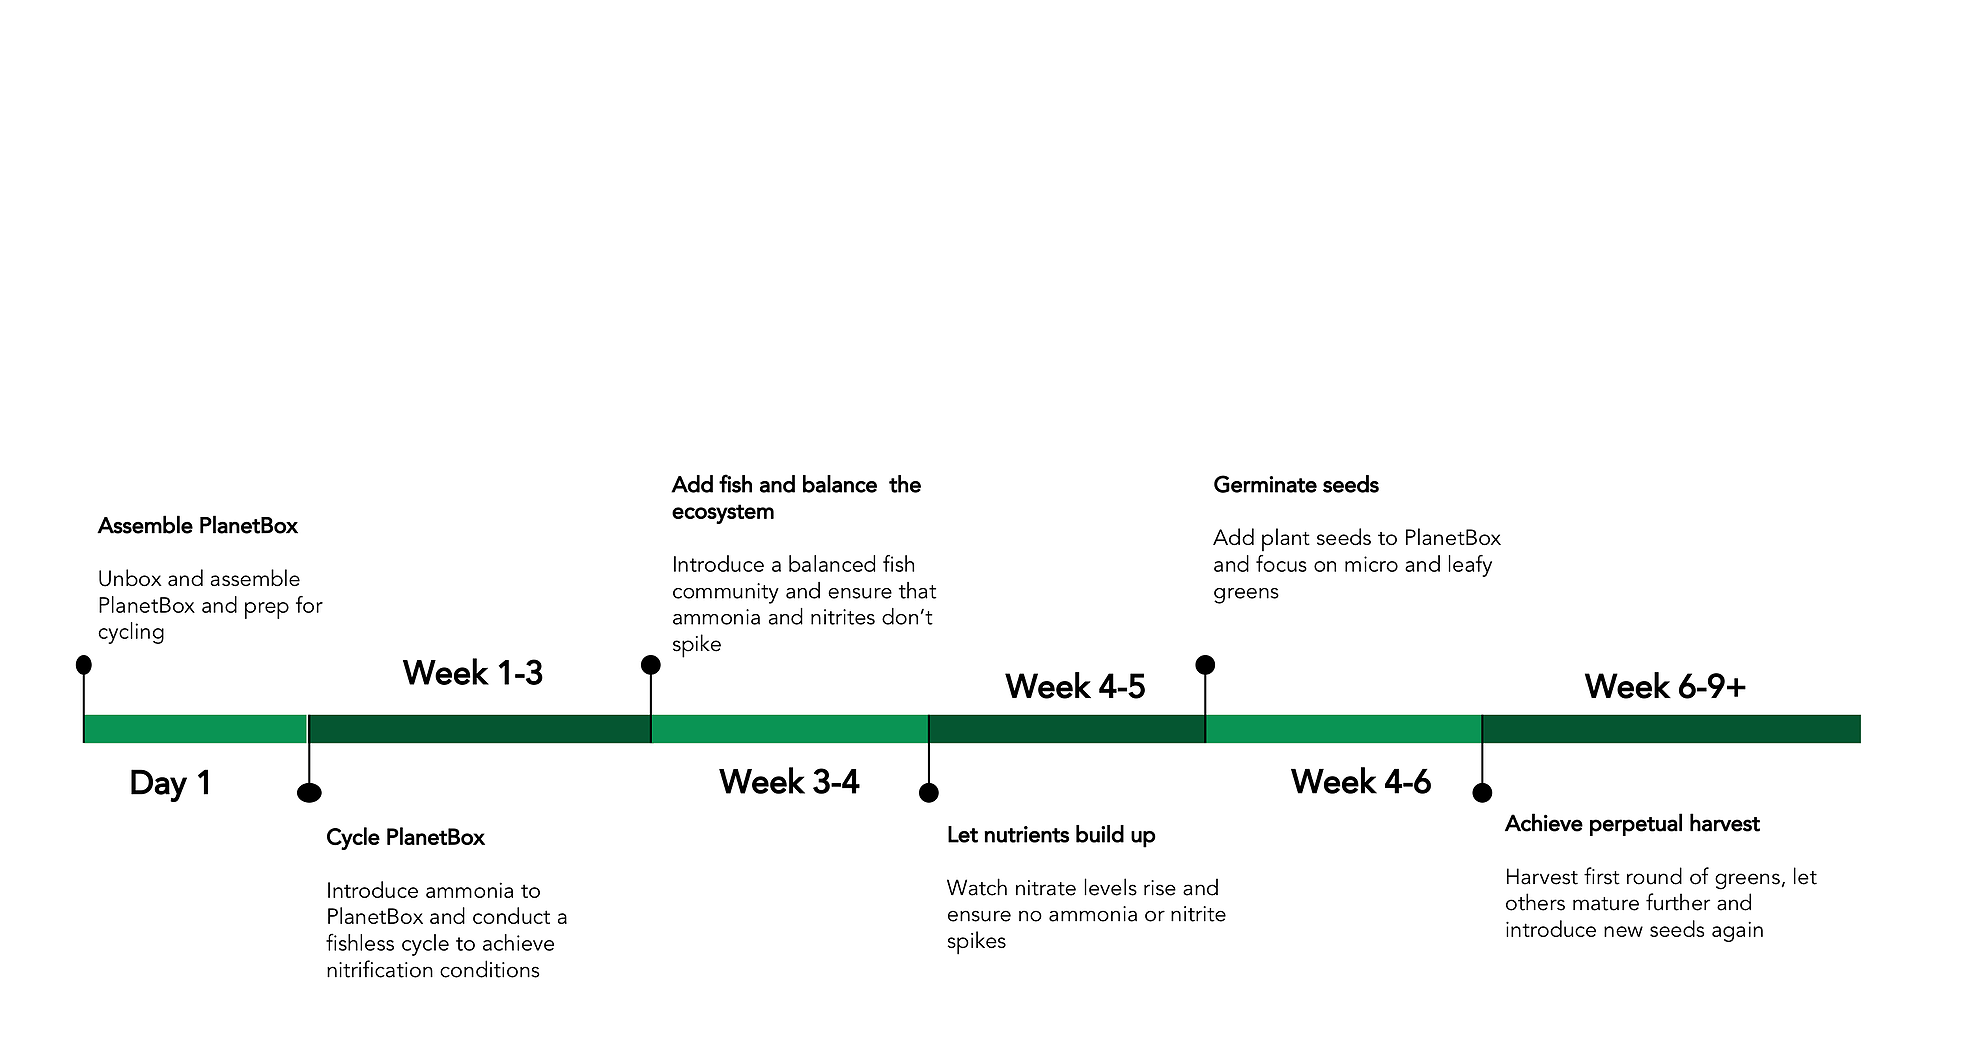 PlanetBox's Operational Timeline 